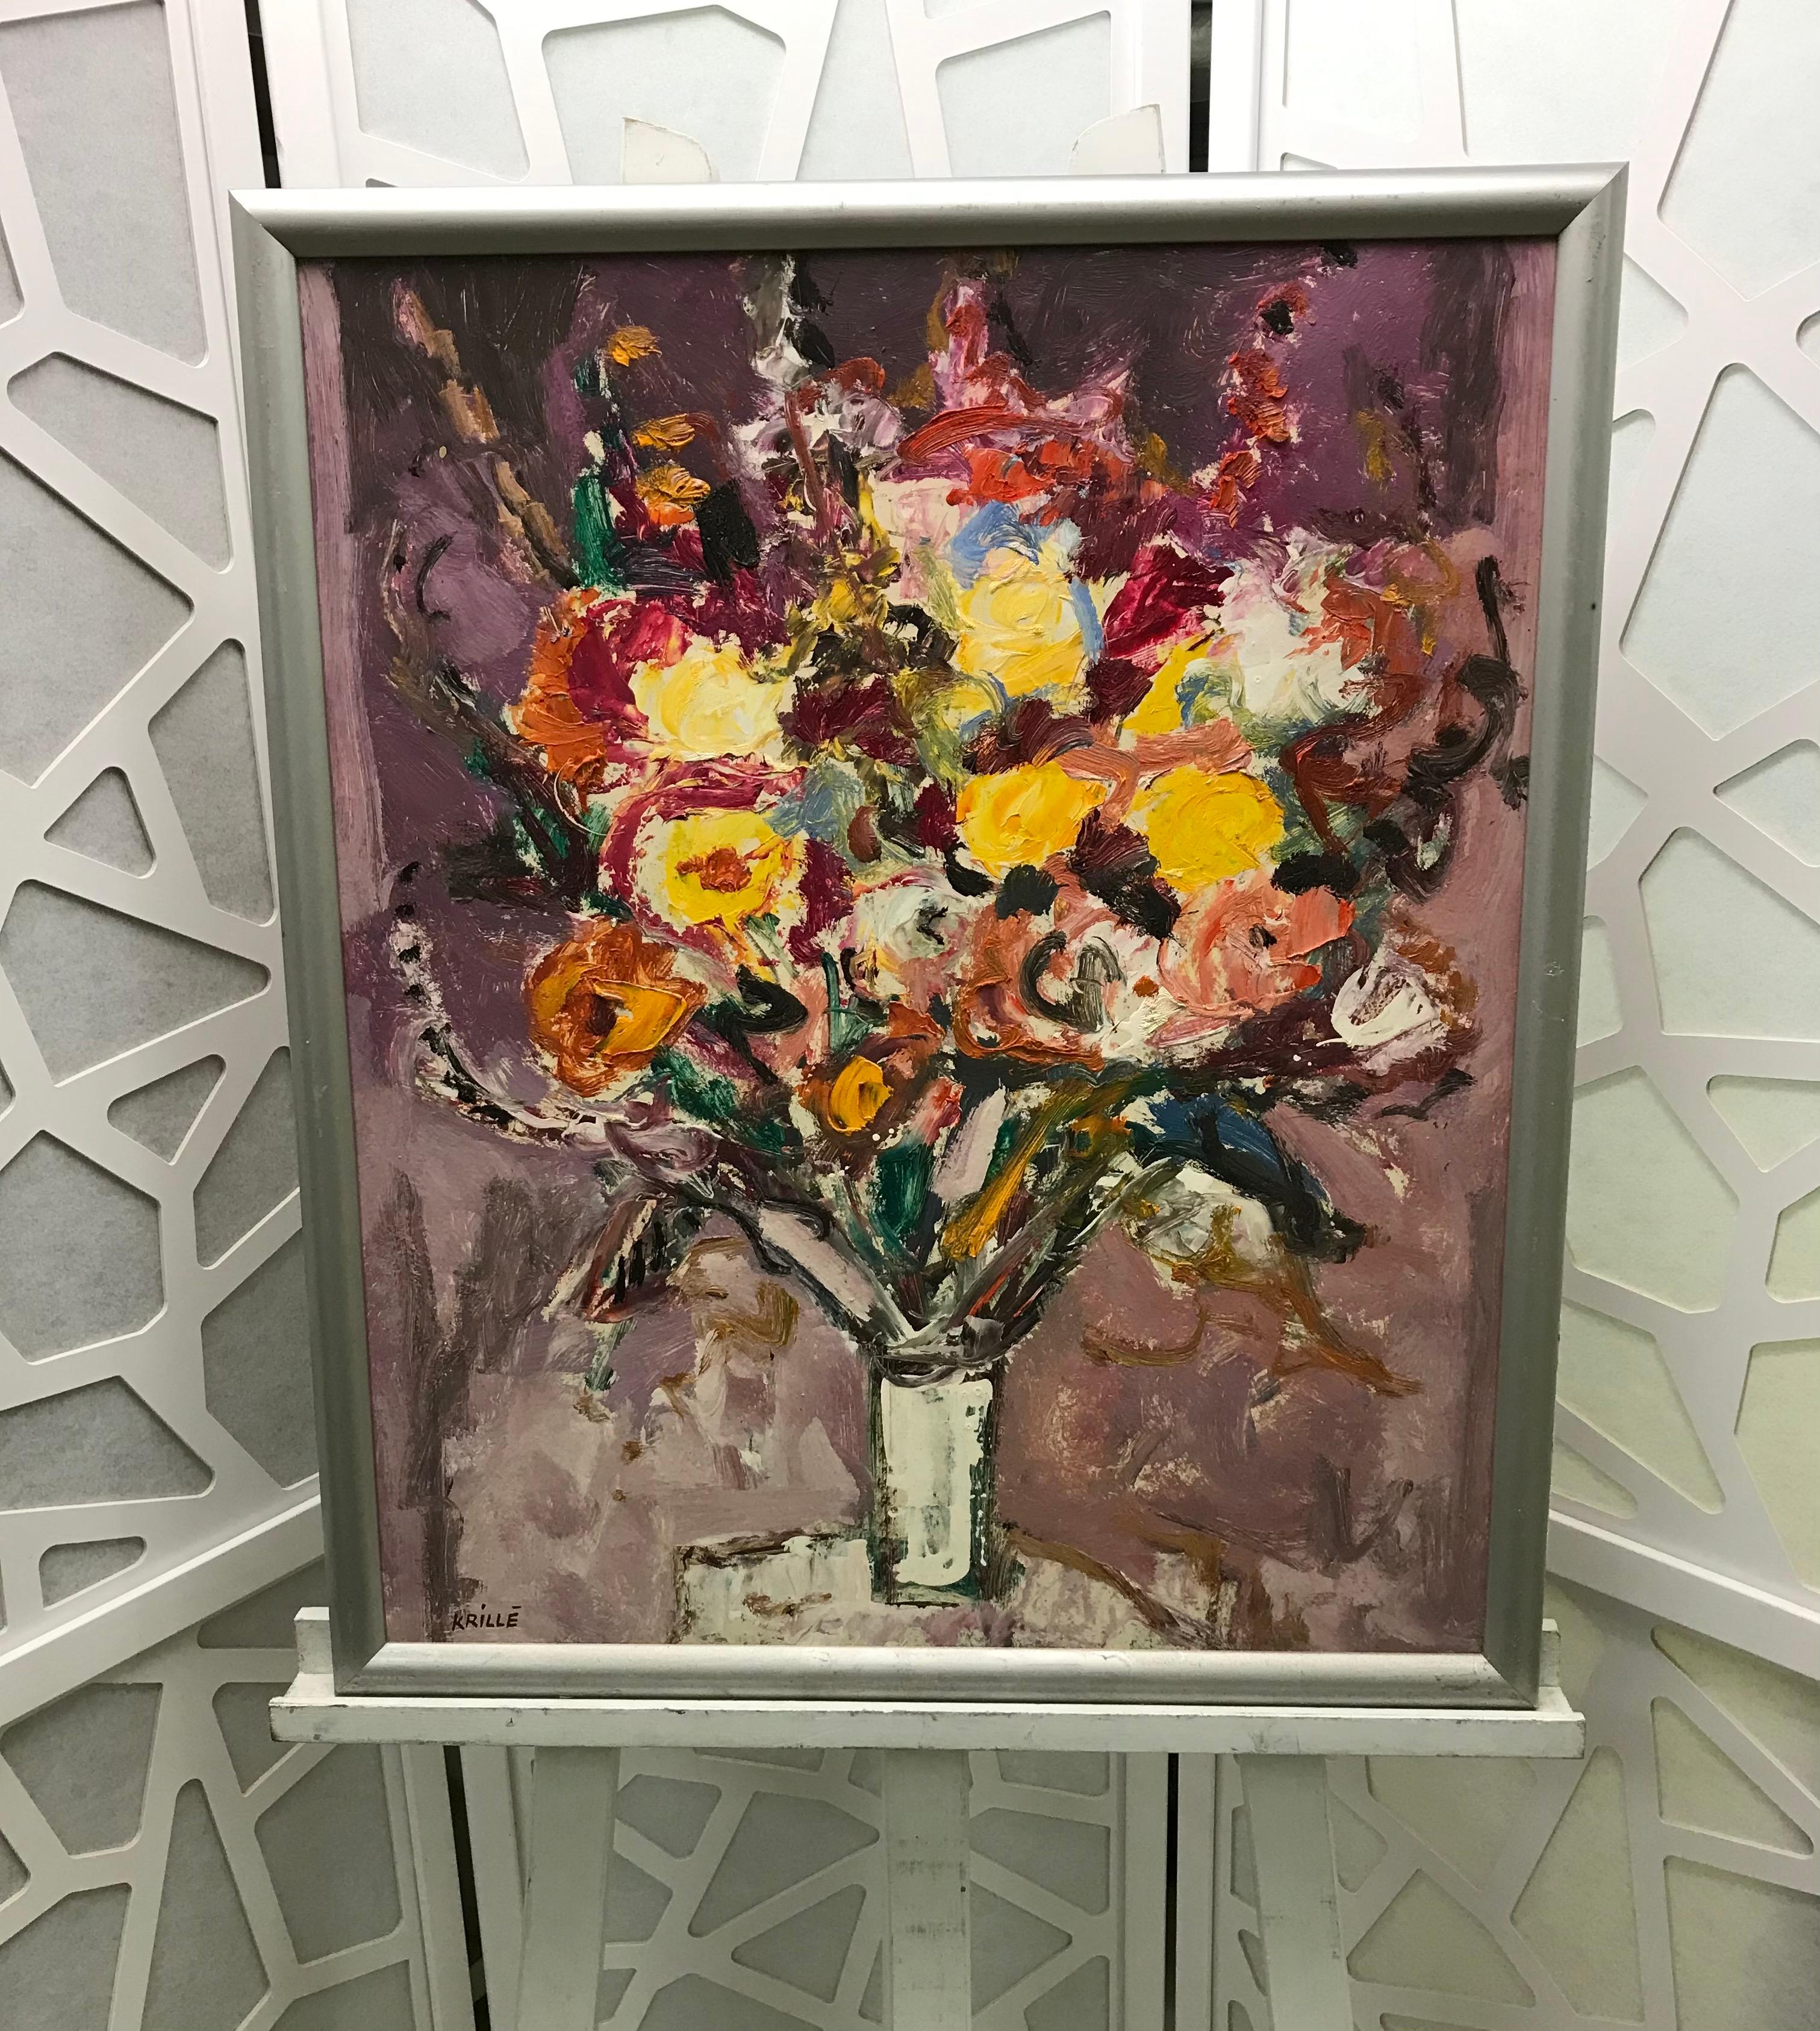 Flower vase - Painting by Jean Krille